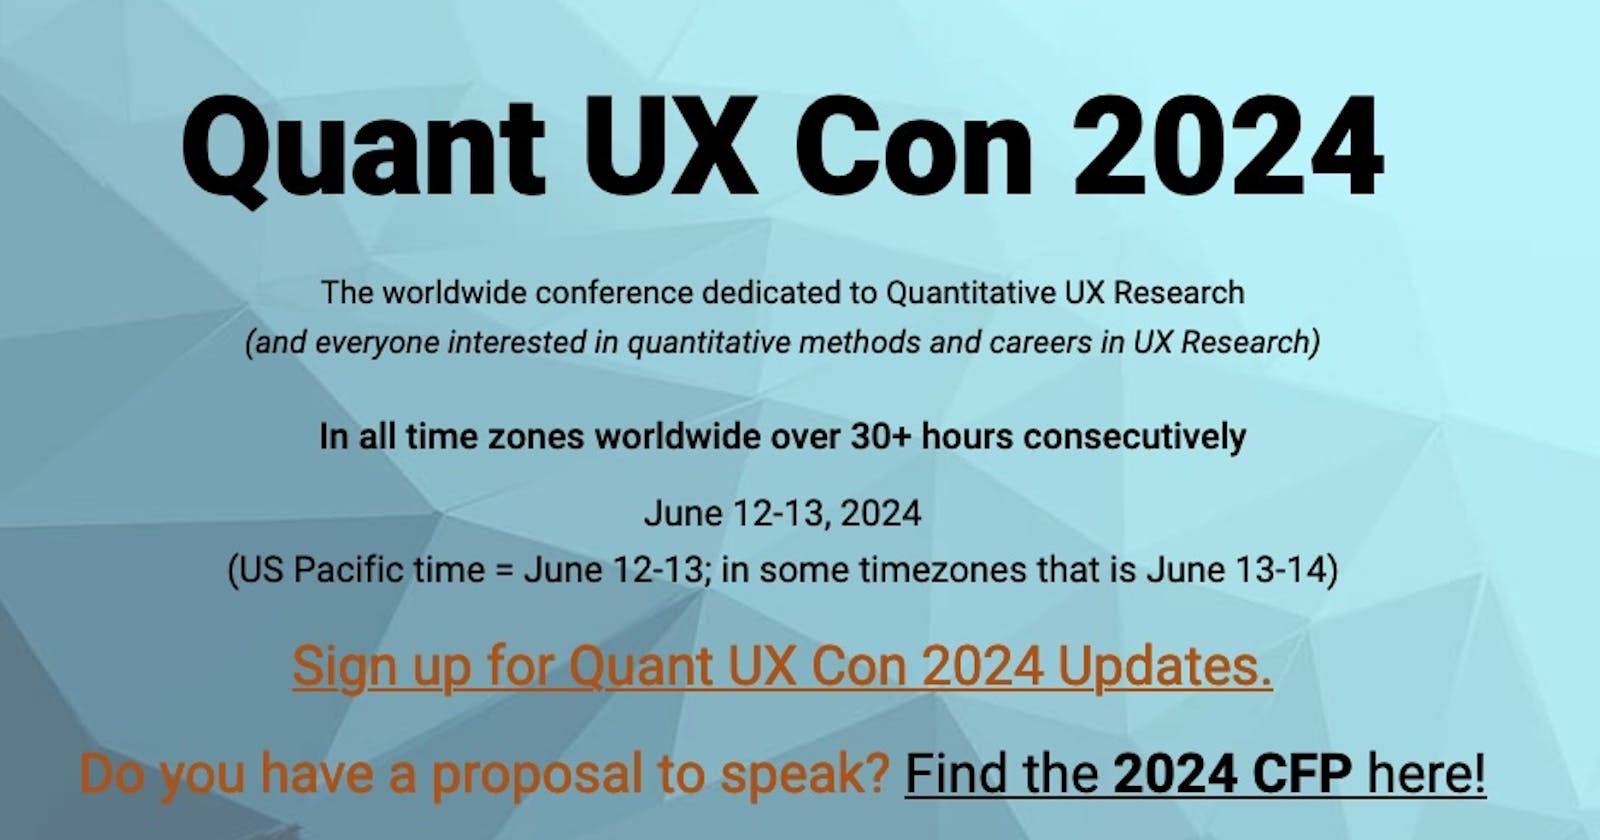 The CFP is open for Quant UX Con 2024